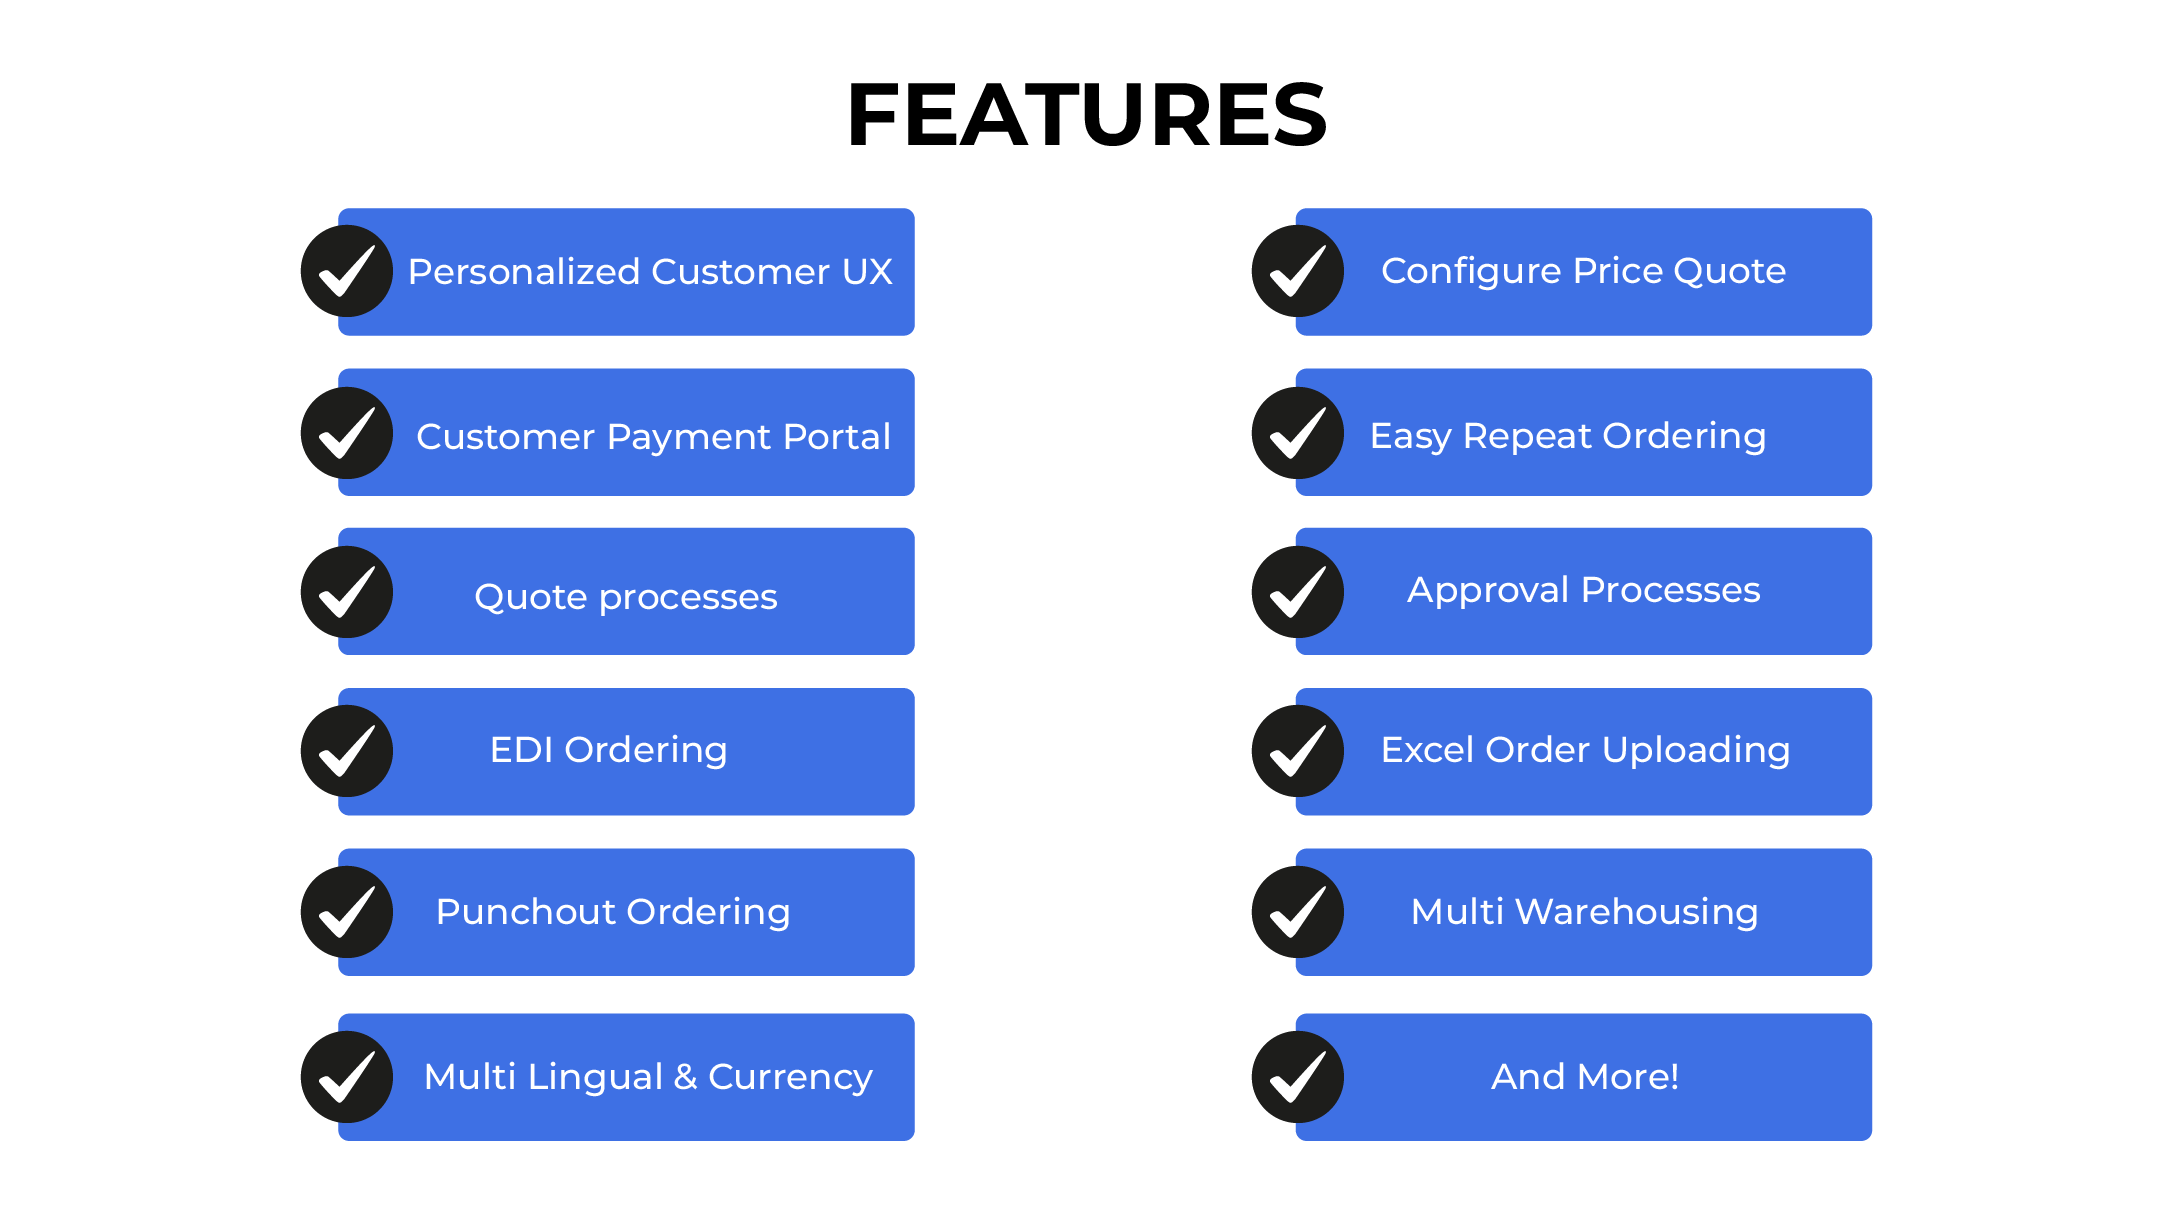 Features of Cloudfy's B2B ecommerce platform